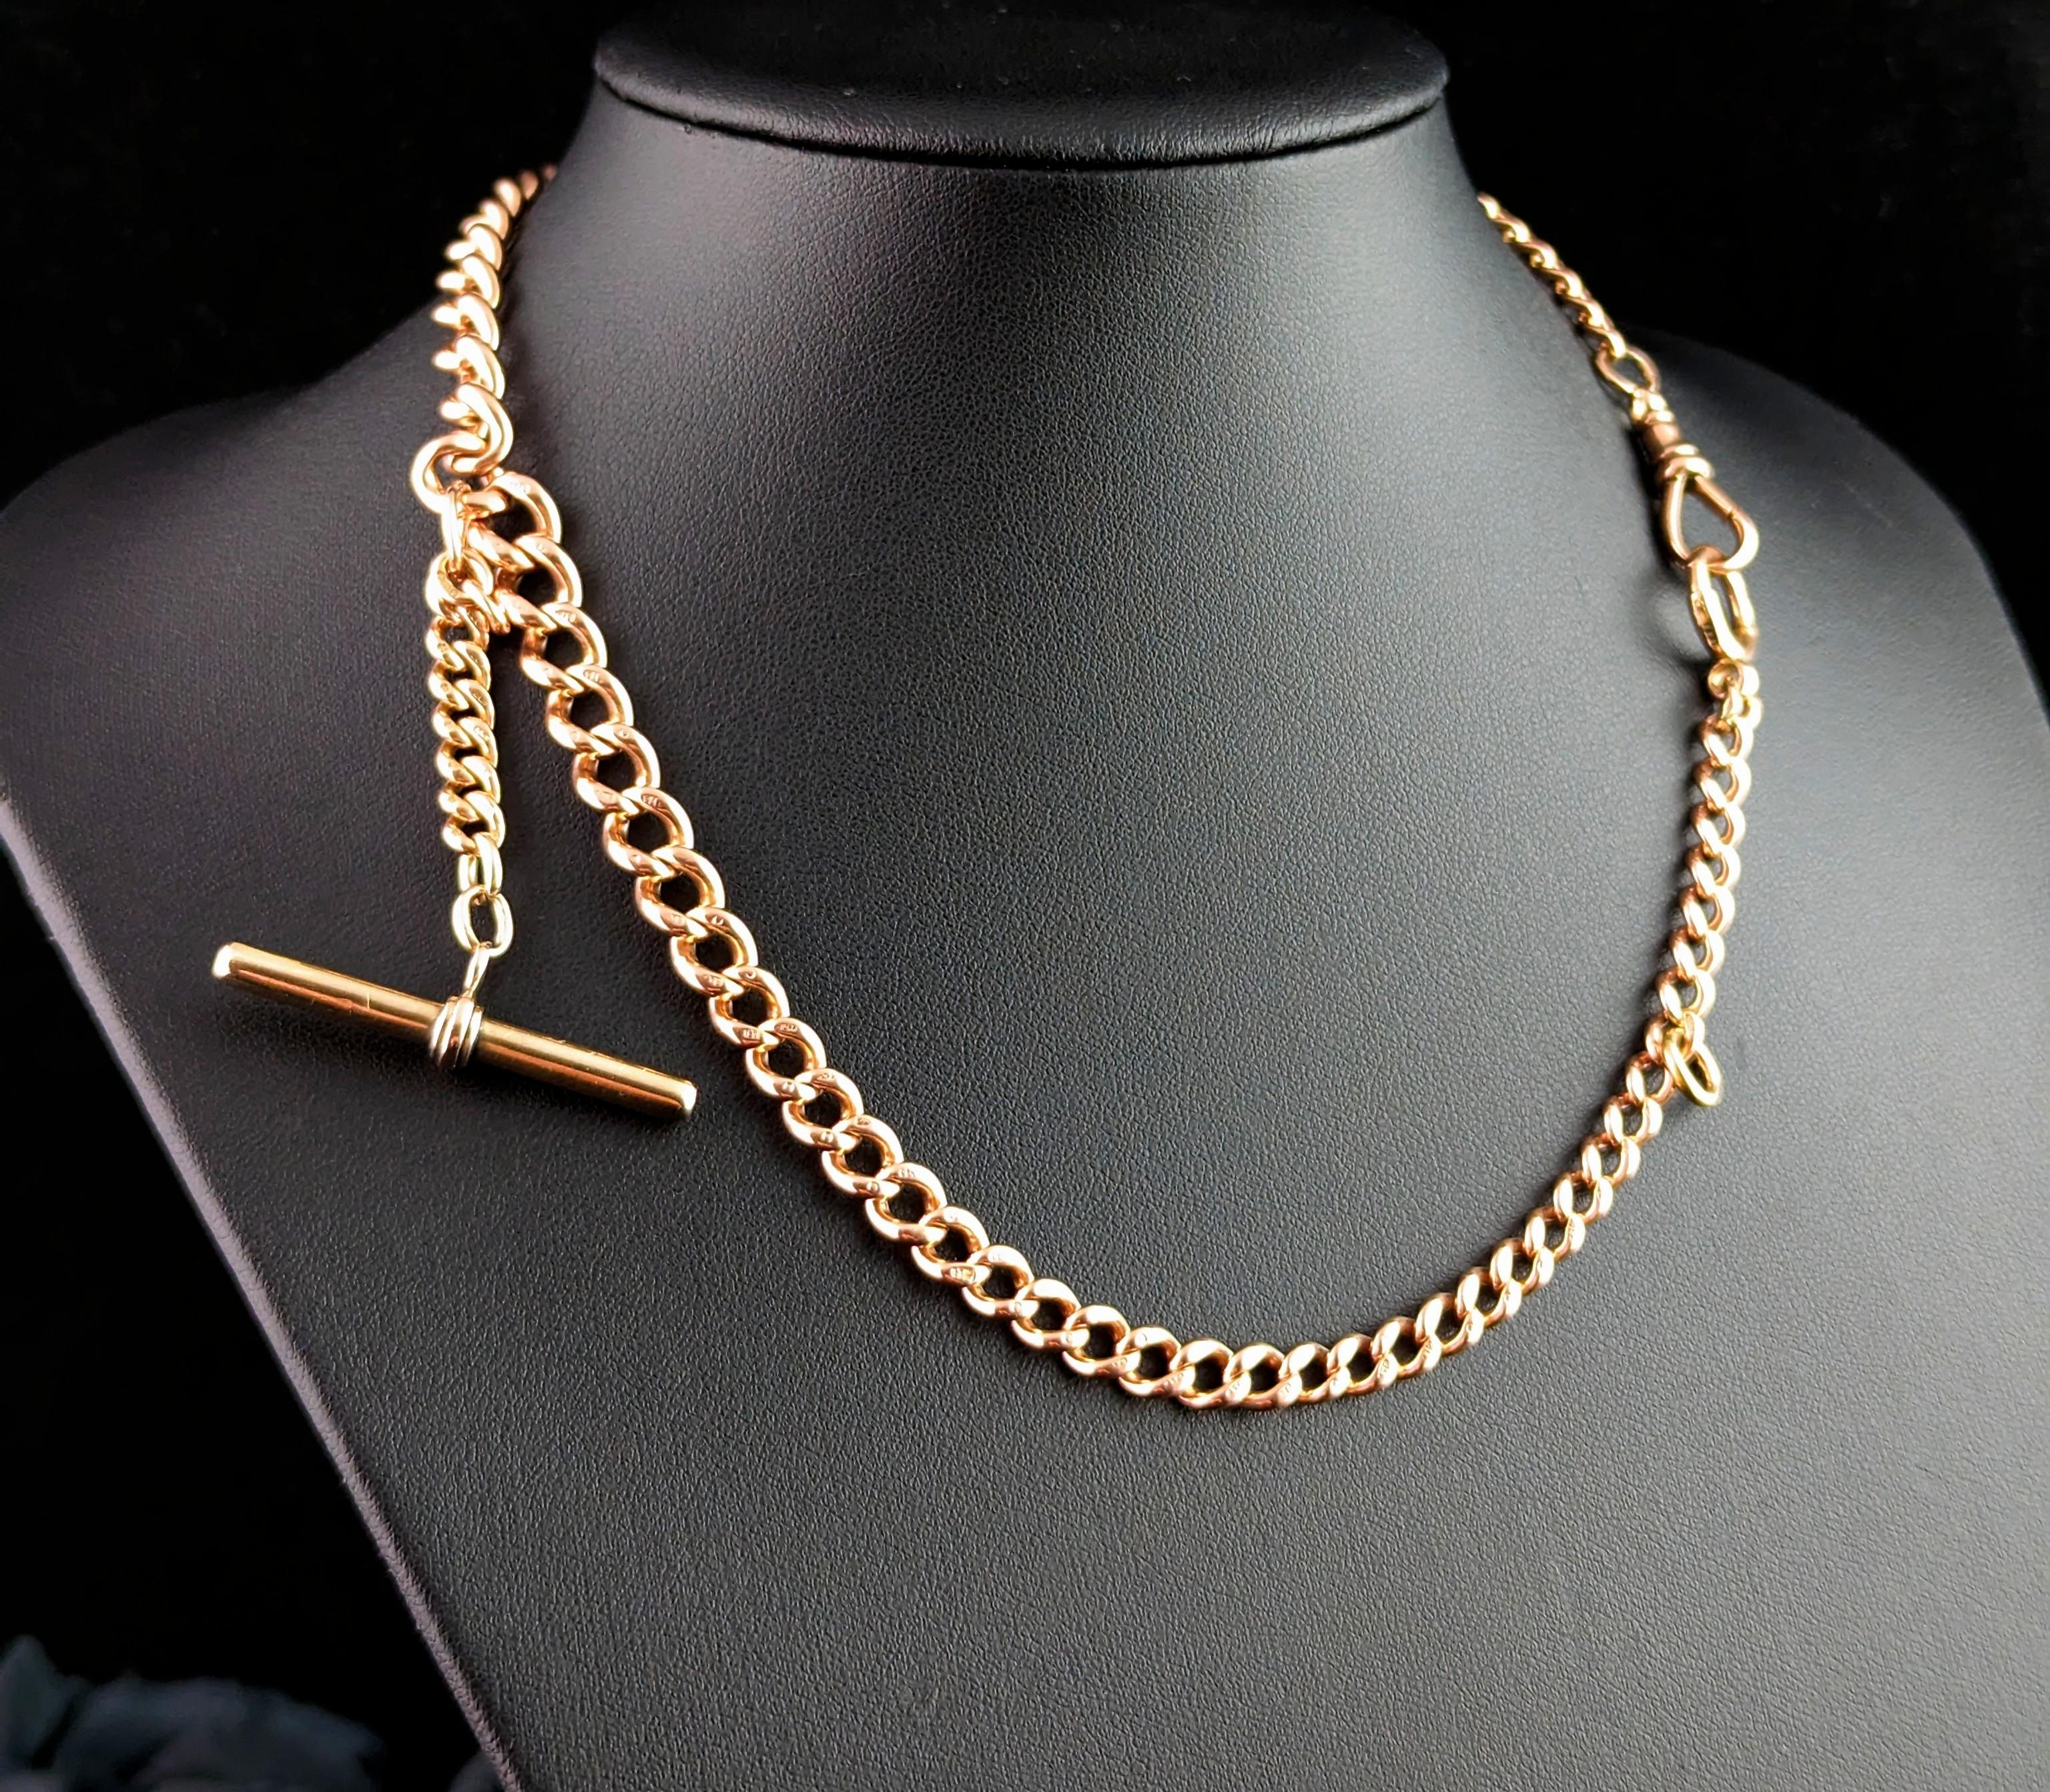 You are sure to be charmed by this handsome antique Edwardian era 9kt Rose gold Albert chain.

It is a curb link chain in 9kt Rose gold, each link individually stamped for 9ct gold, 9.375.

A double Albert with a graduating curb link width adjoined